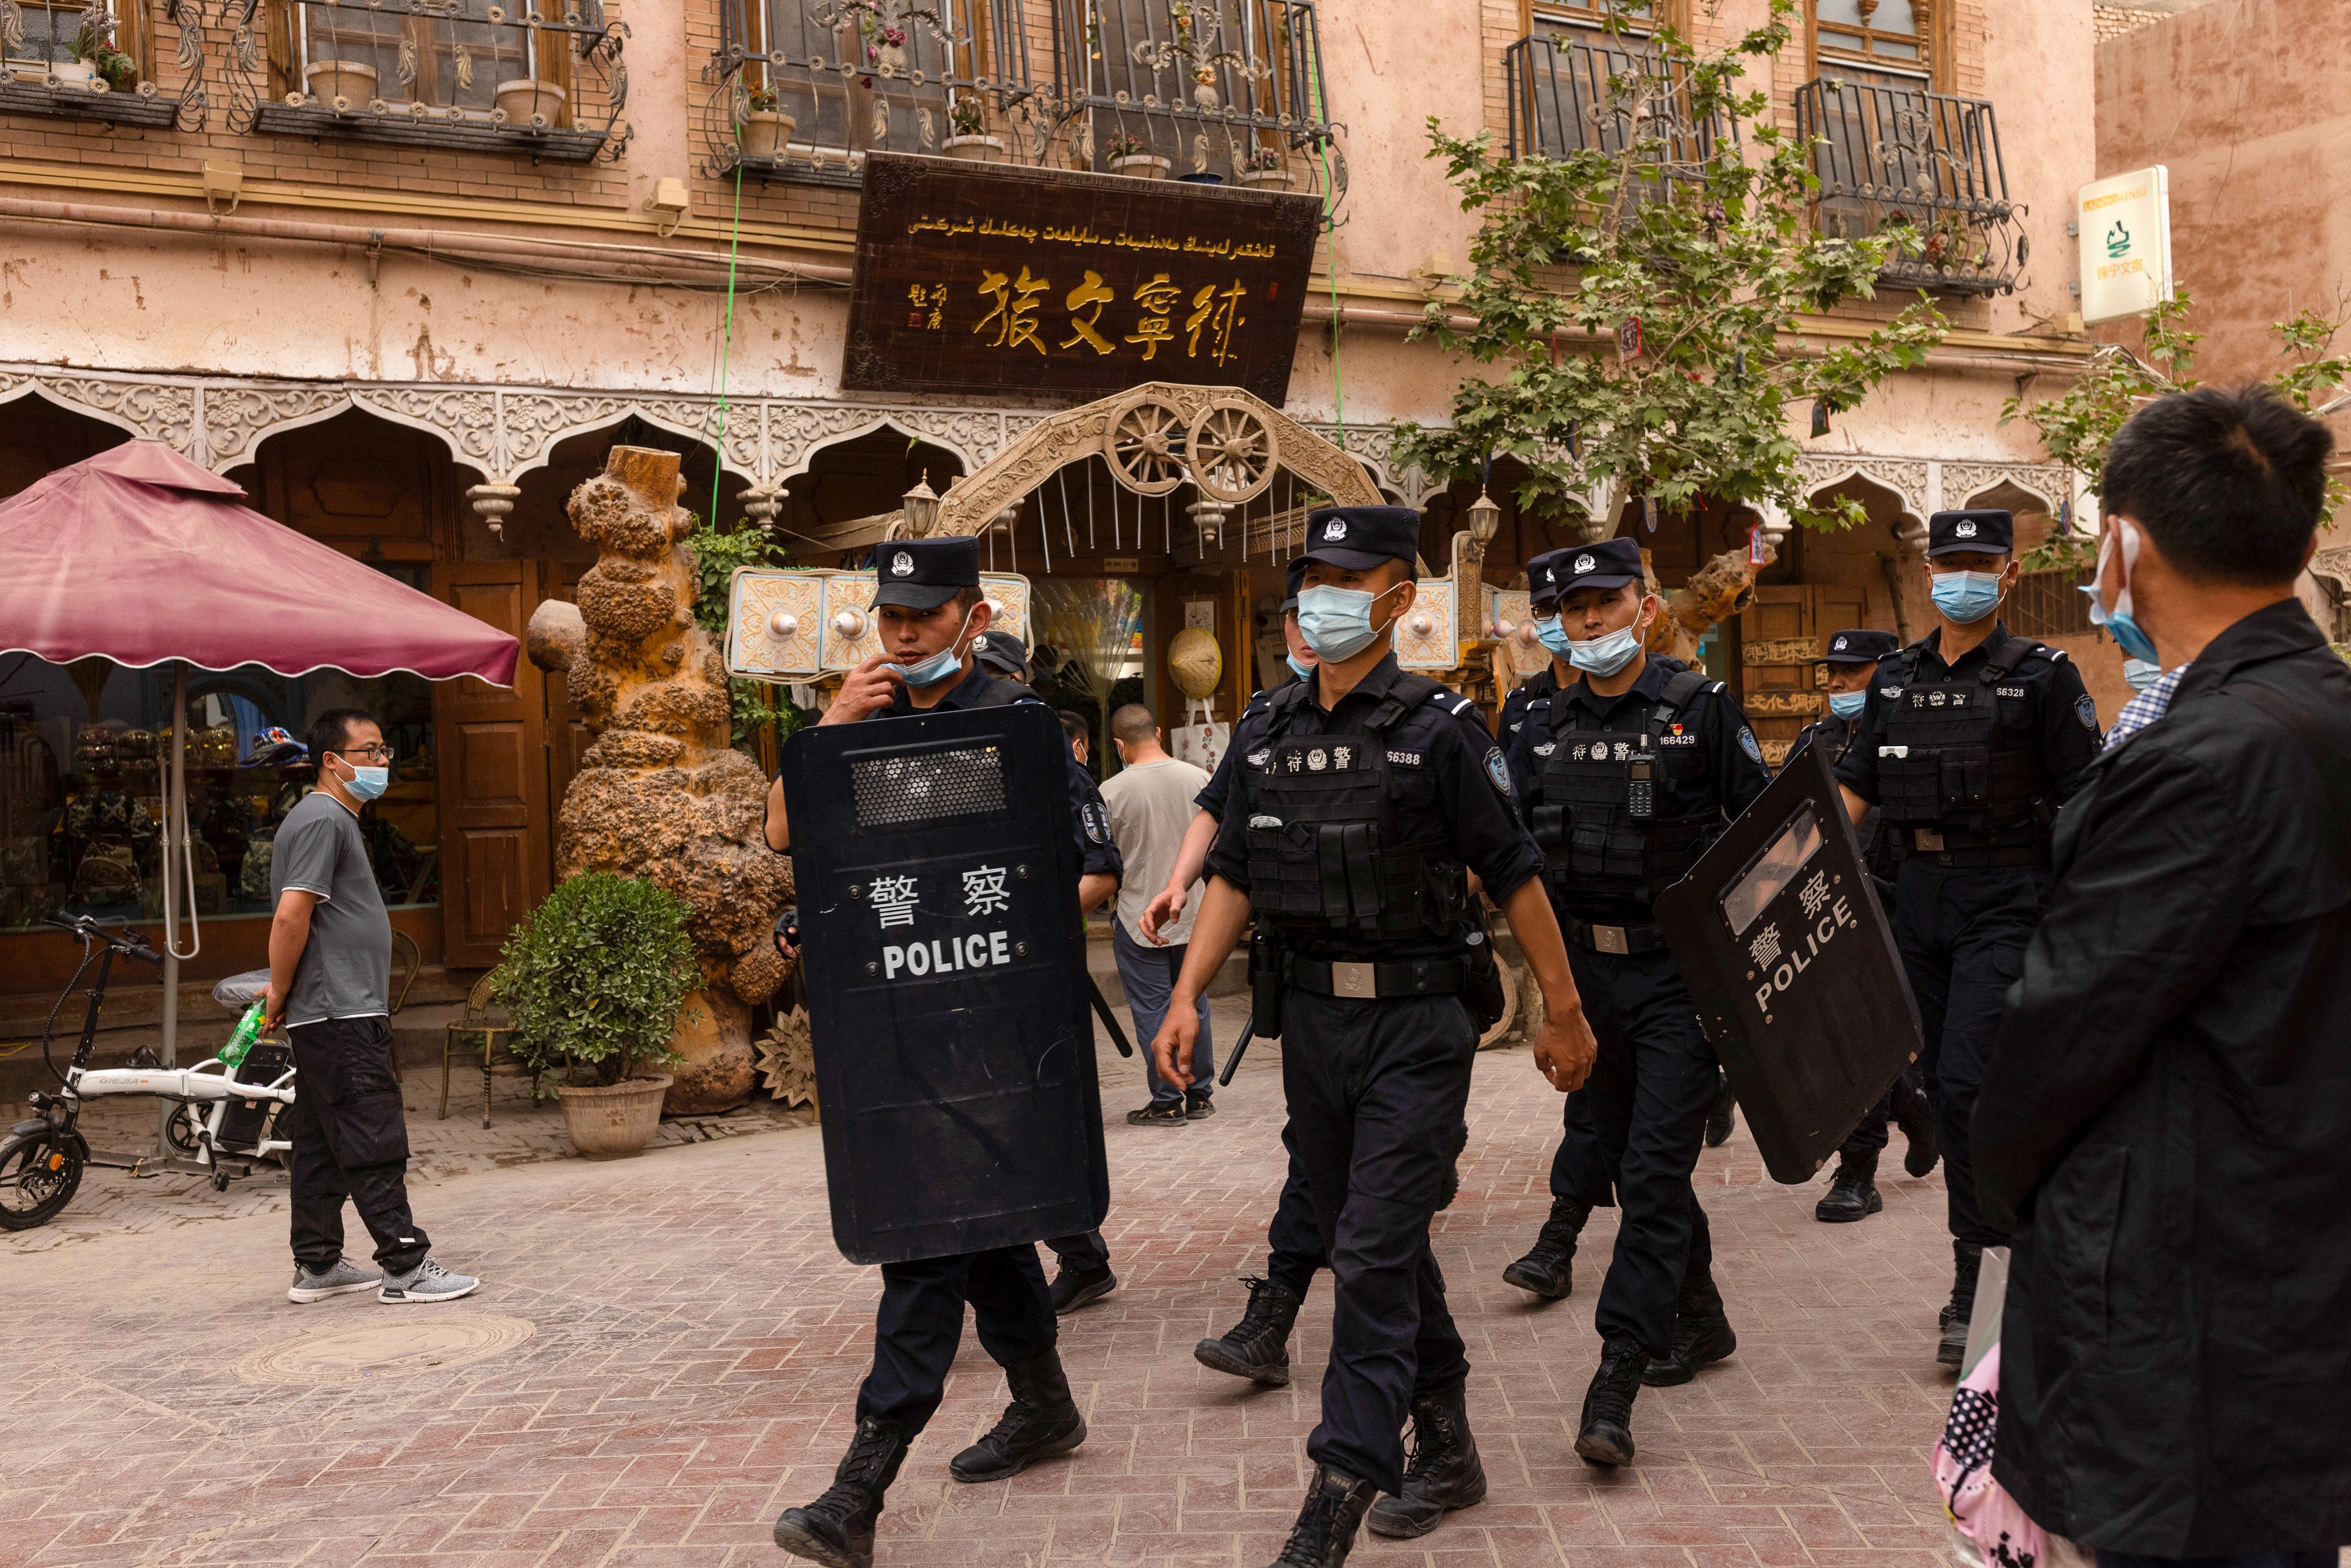 A crackdown on extremism among Uygurs and other Muslim minorities has been under way in Xinjiang for years. Photo: Reuters